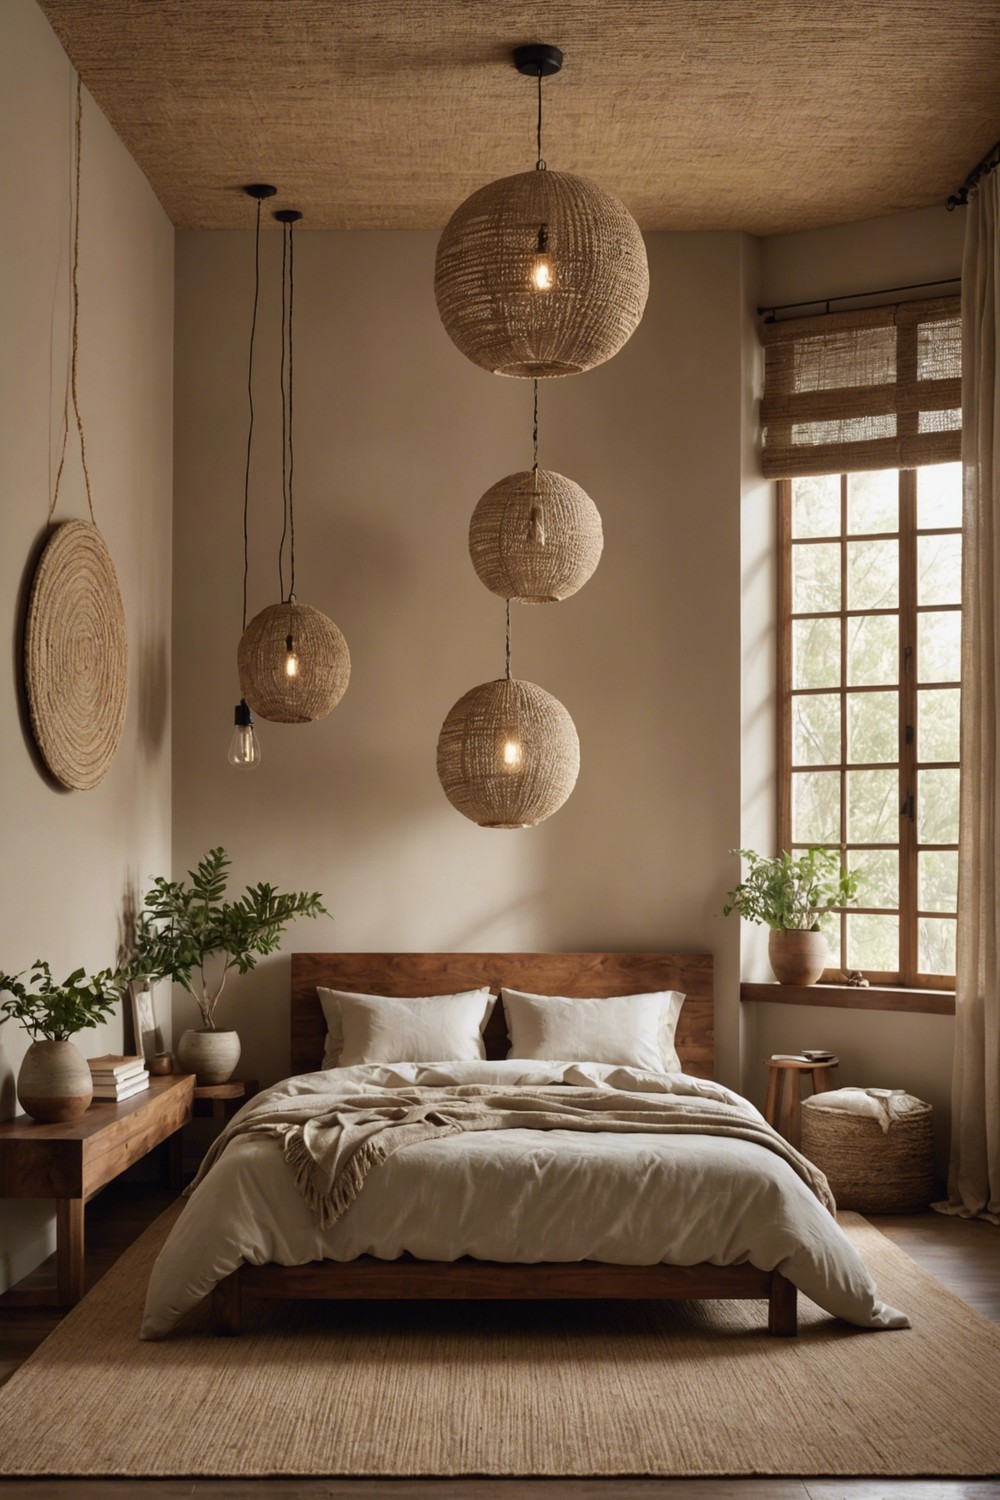 Cozy Oasis: Woven Hanging Lights above Plush Rugs